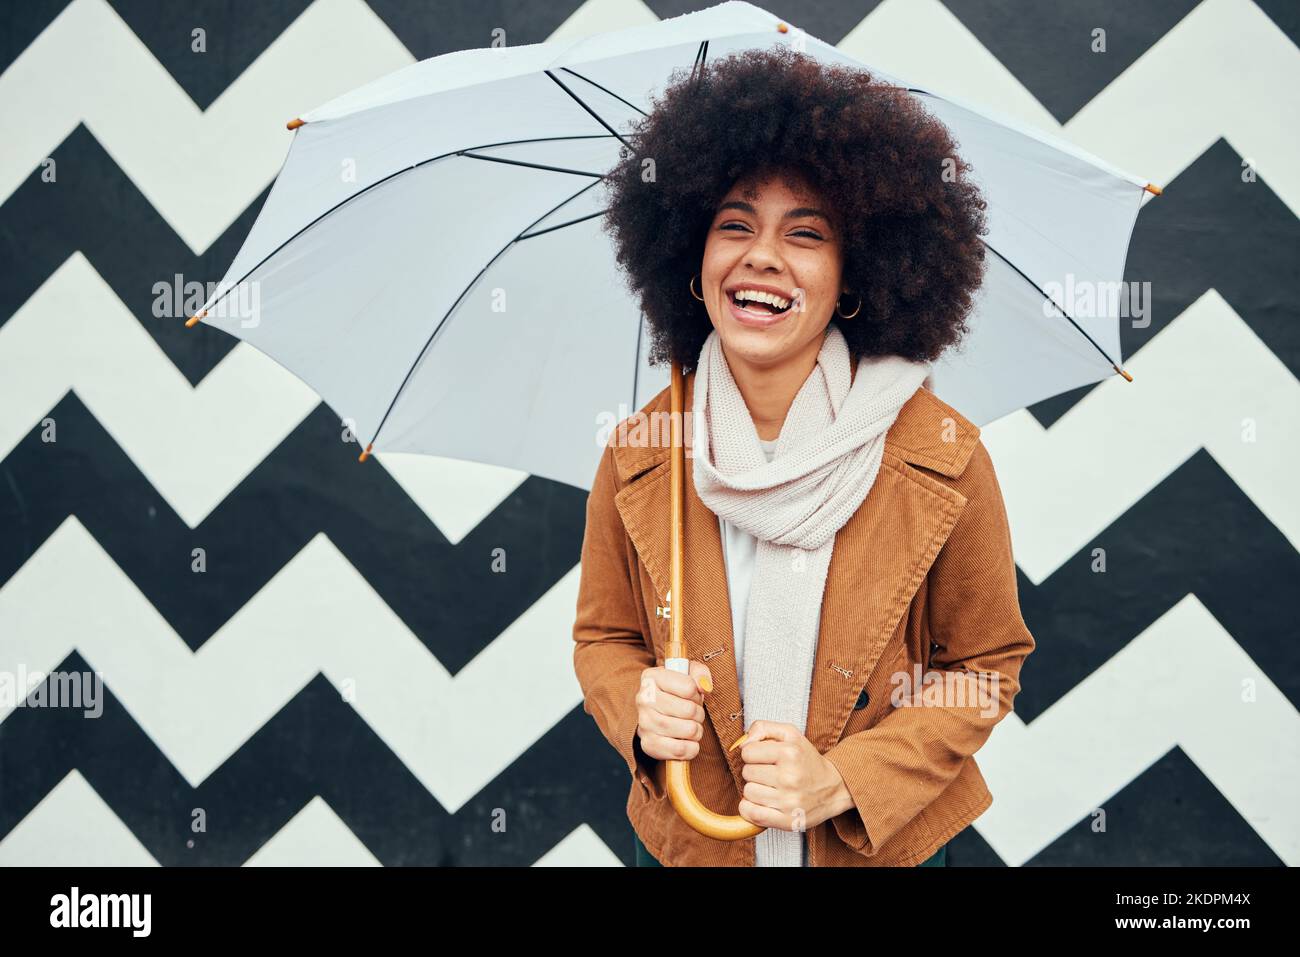 Creative, fashion and black woman with umbrella in city standing by black and white pattern wall. Beauty, happiness and girl enjoying weekend, freedom Stock Photo